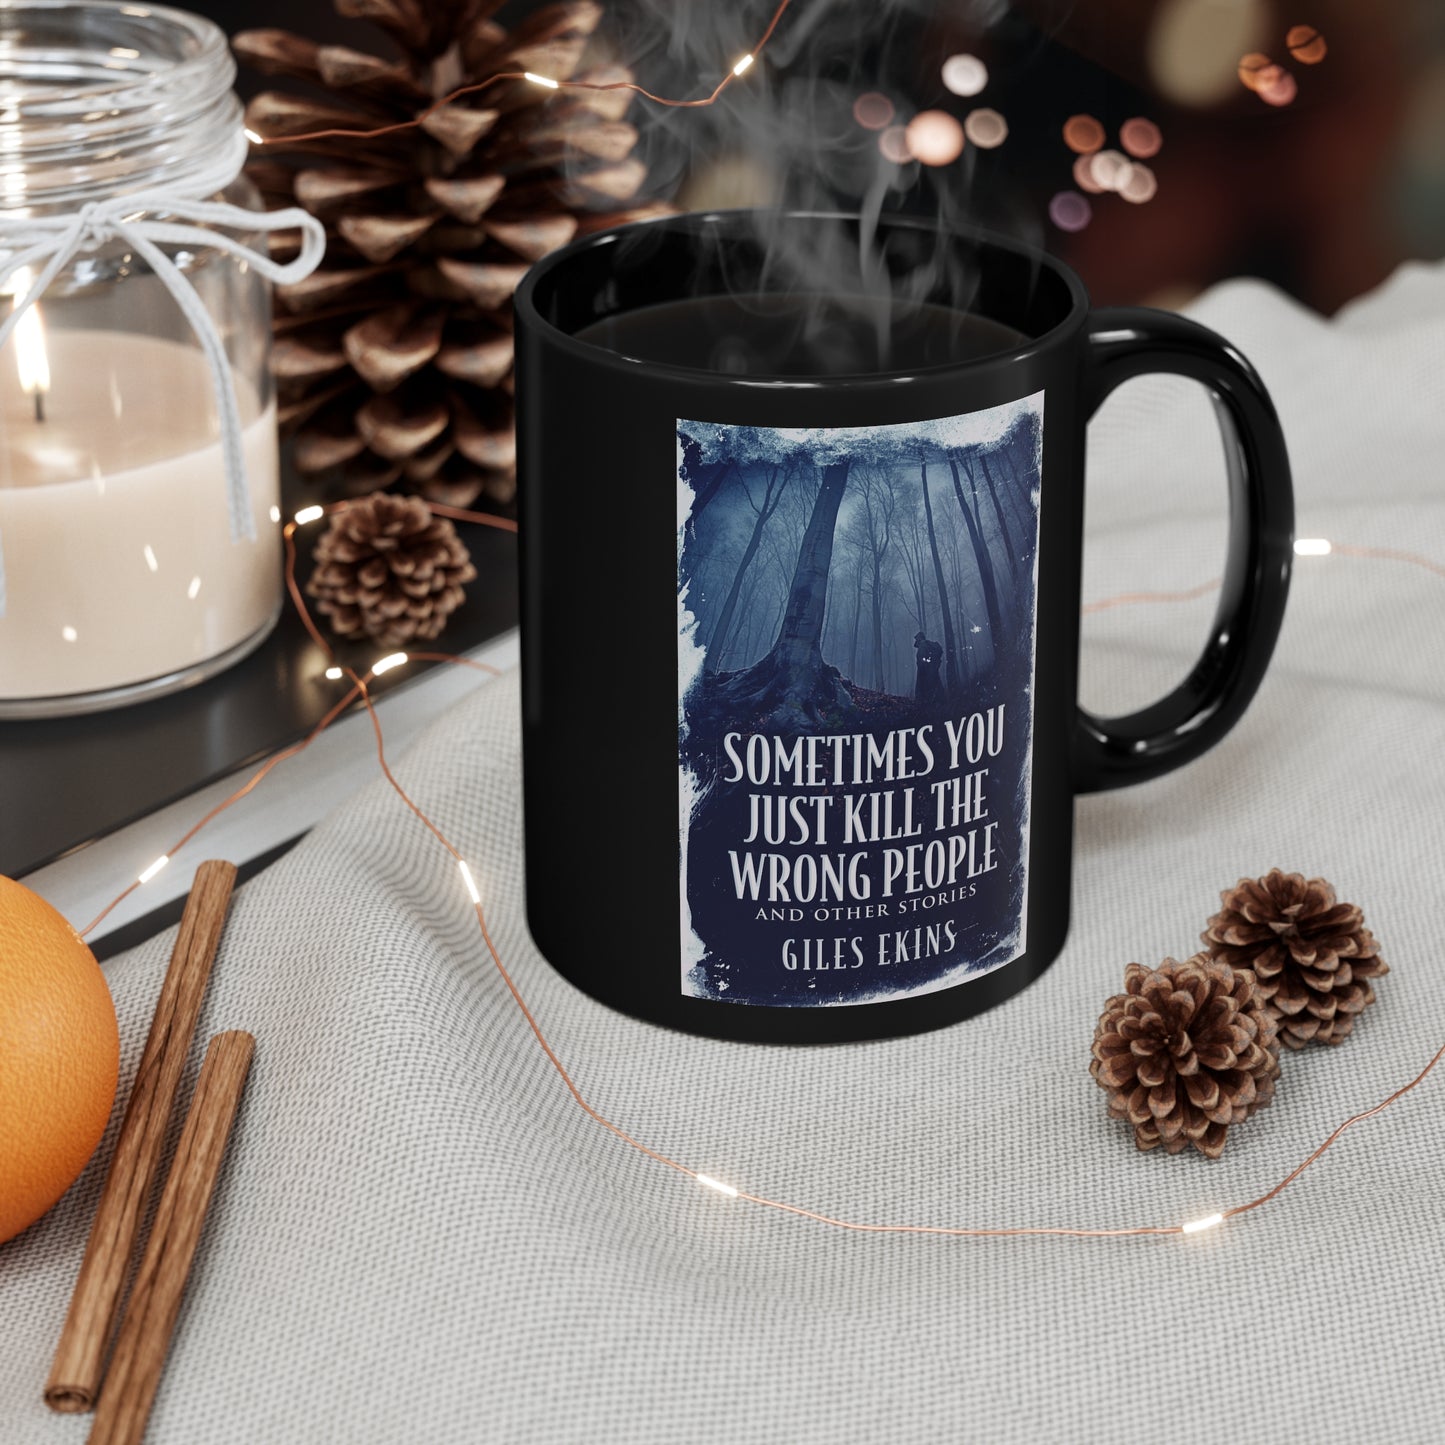 Sometimes You Just Kill The Wrong People and Other Stories - Black Coffee Mug